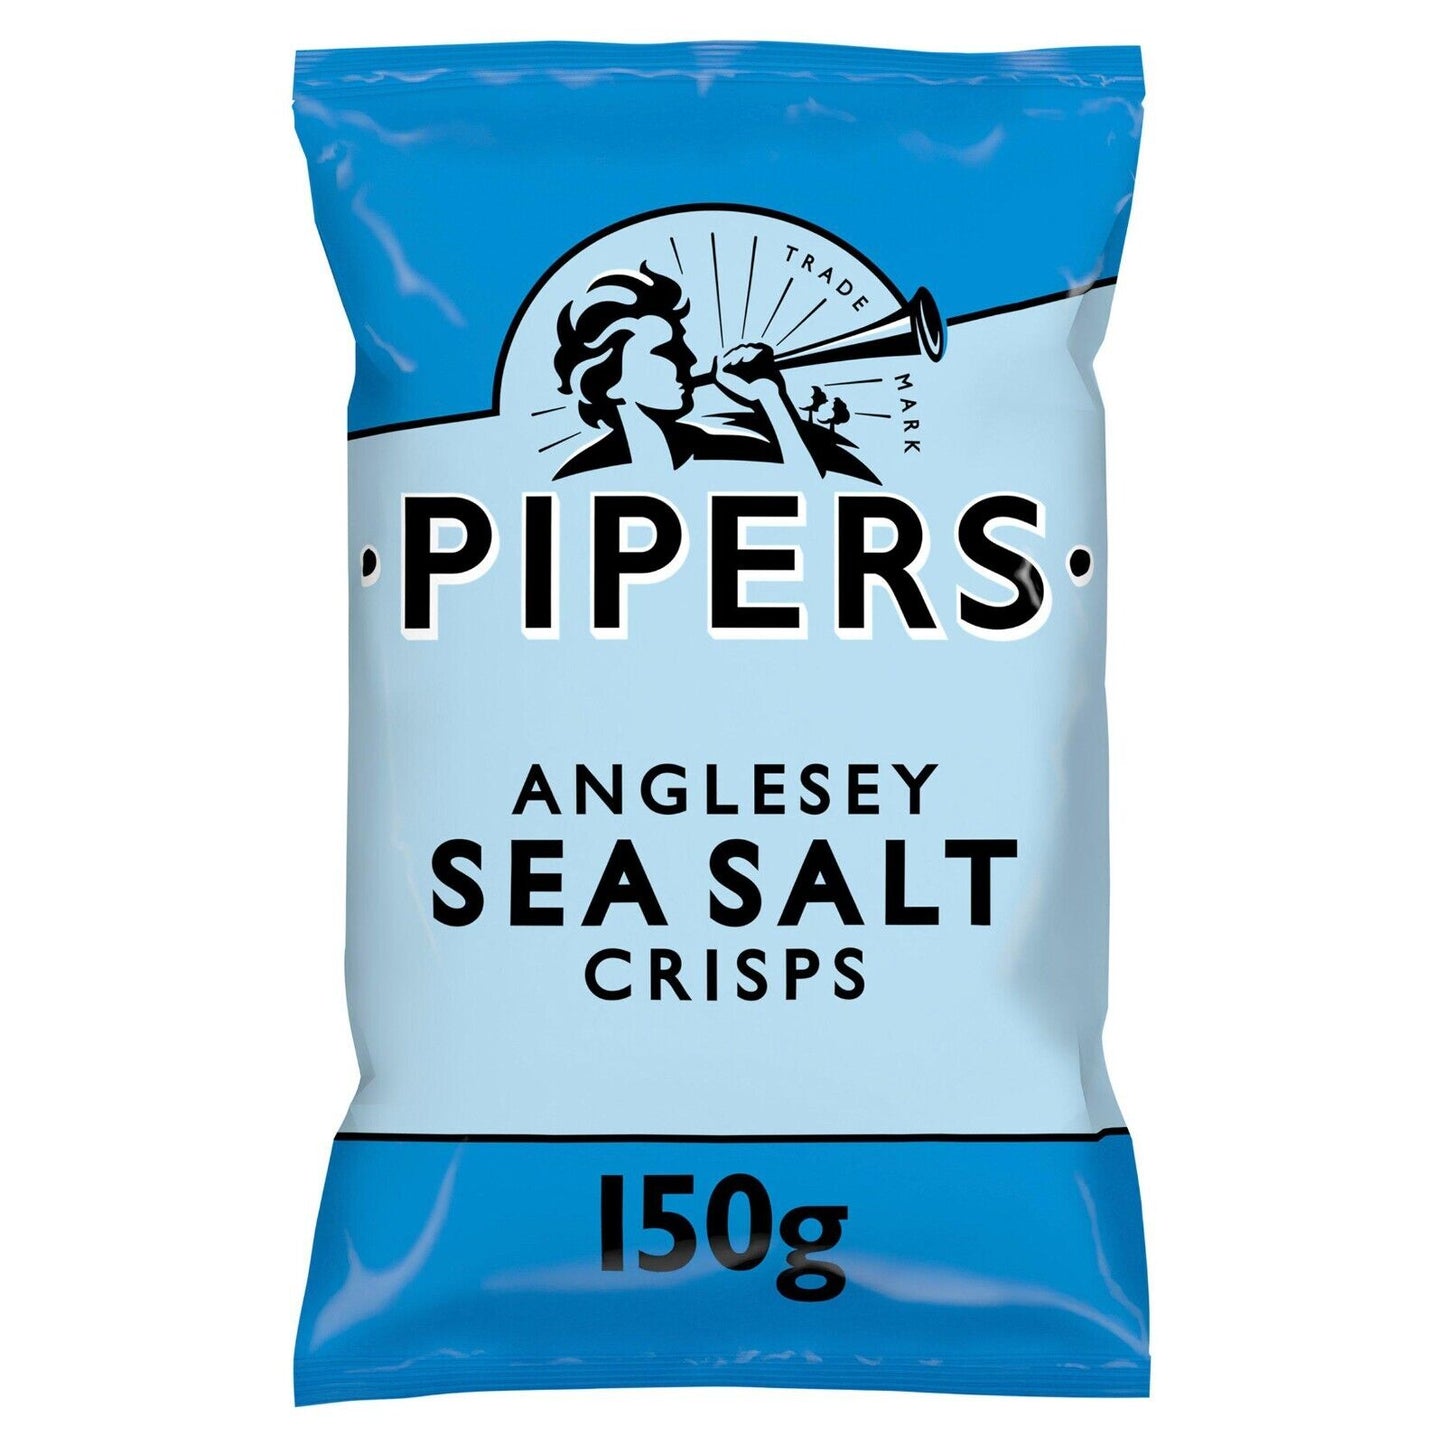 PIPERS ANGLESEY SALT 150G X 15